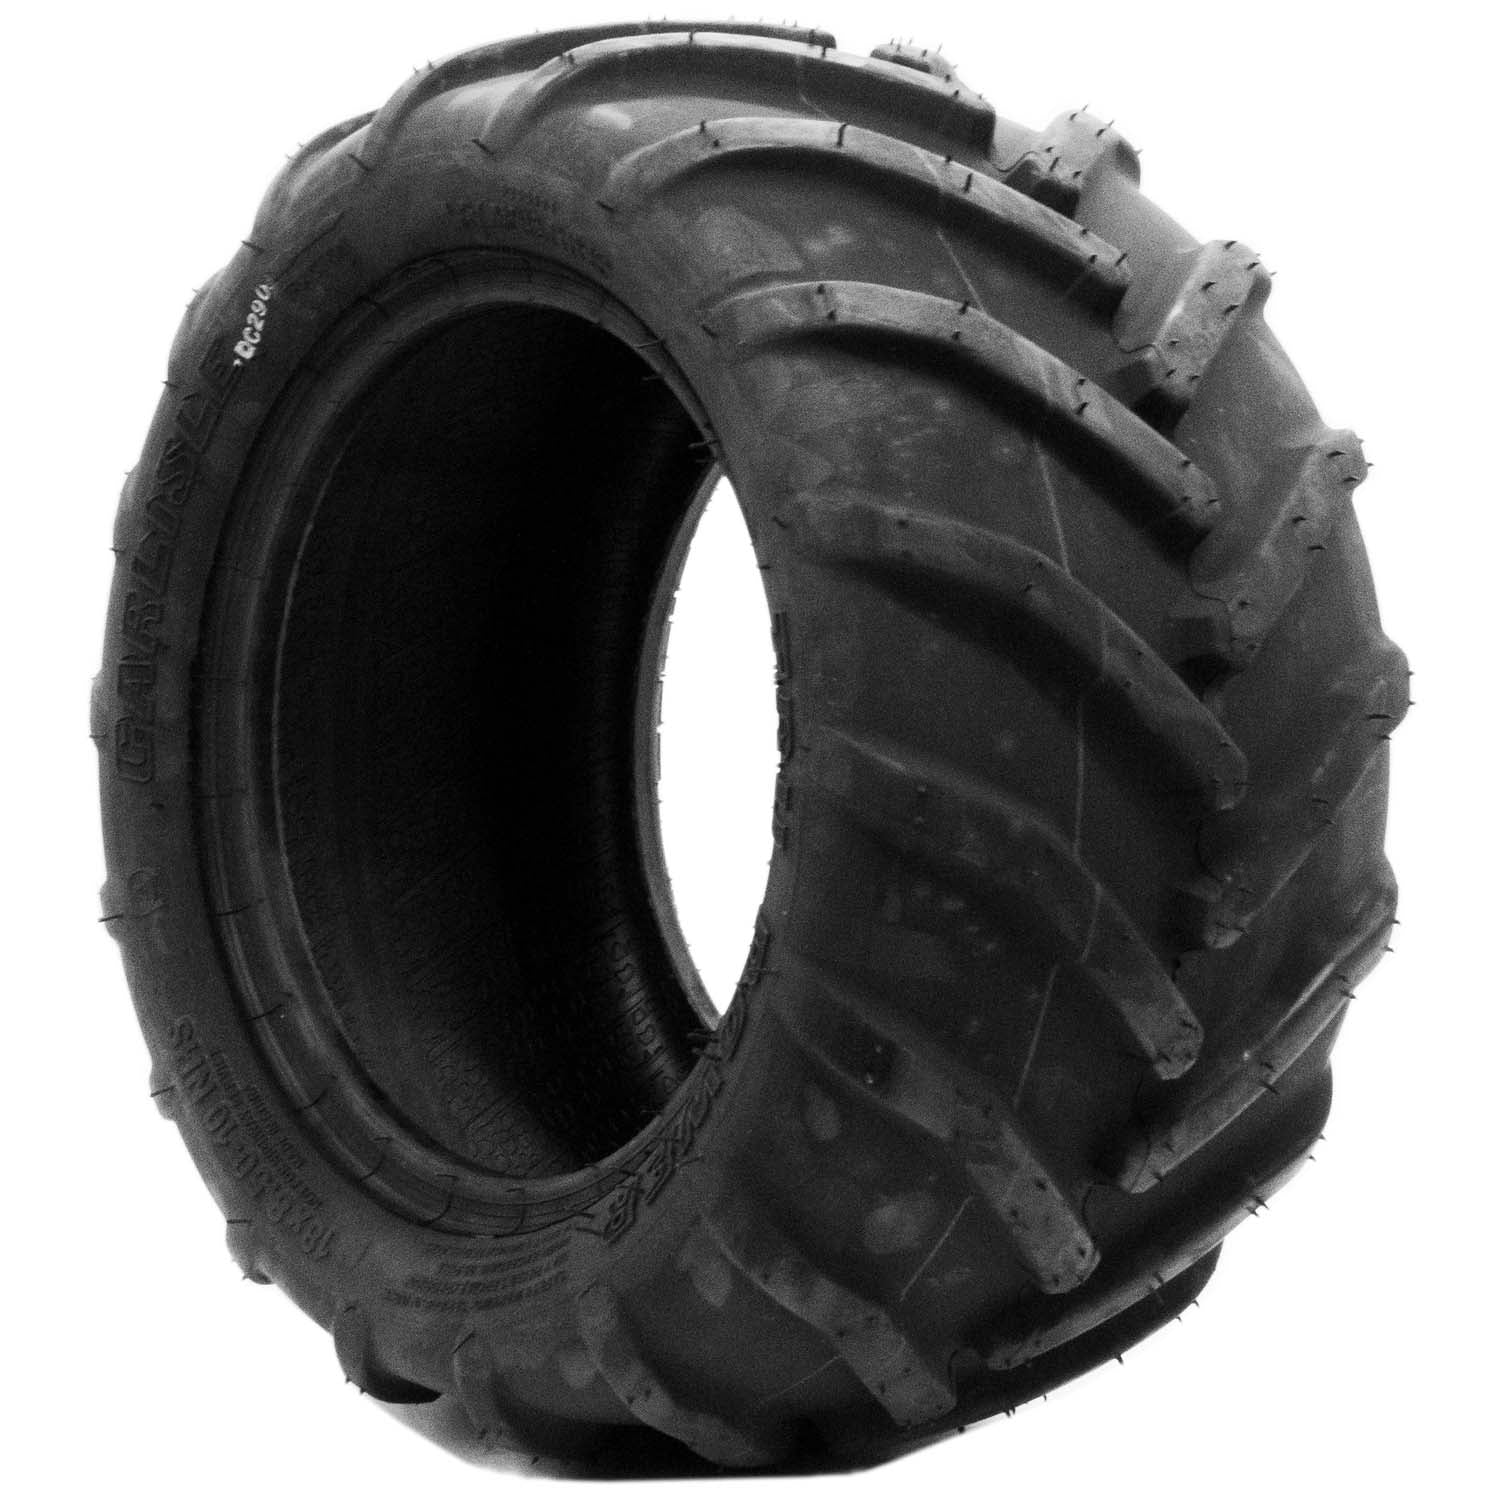 Carlisle Tru Power Lawn and Garden Traction Tire 6ply 29x12.50-15